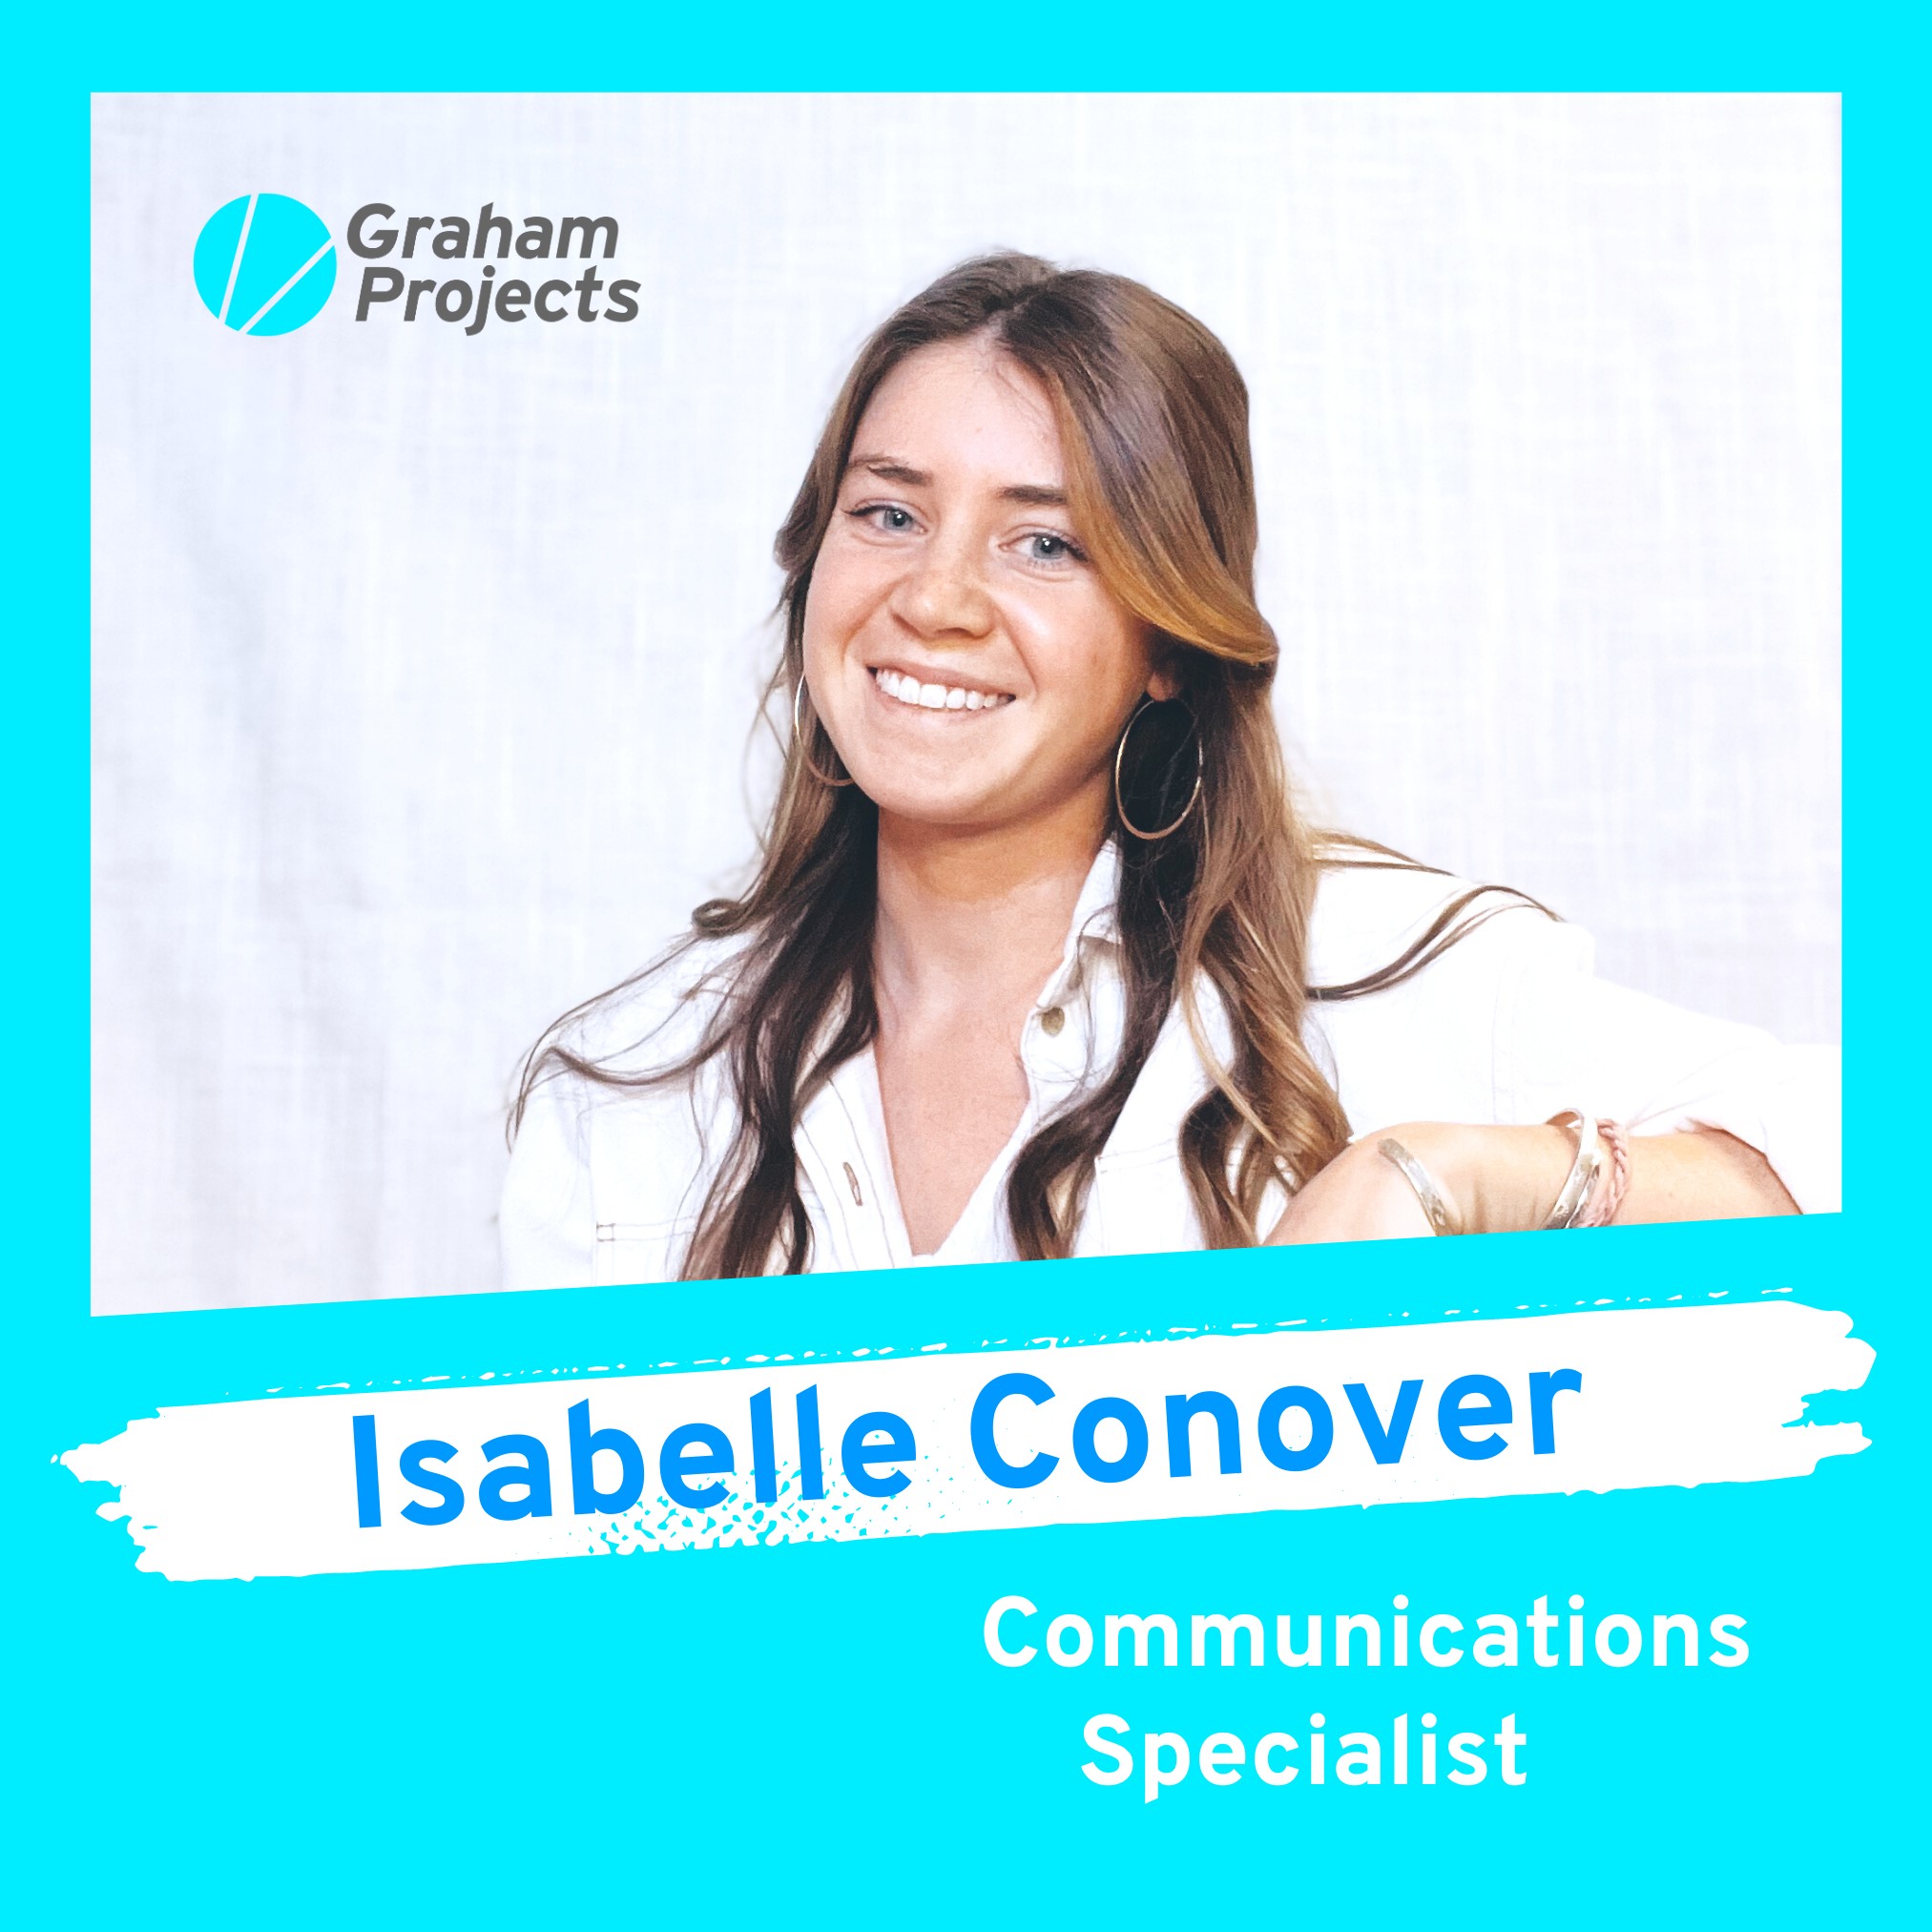 Isabelle Conover new Graham Projects Communications Specialist